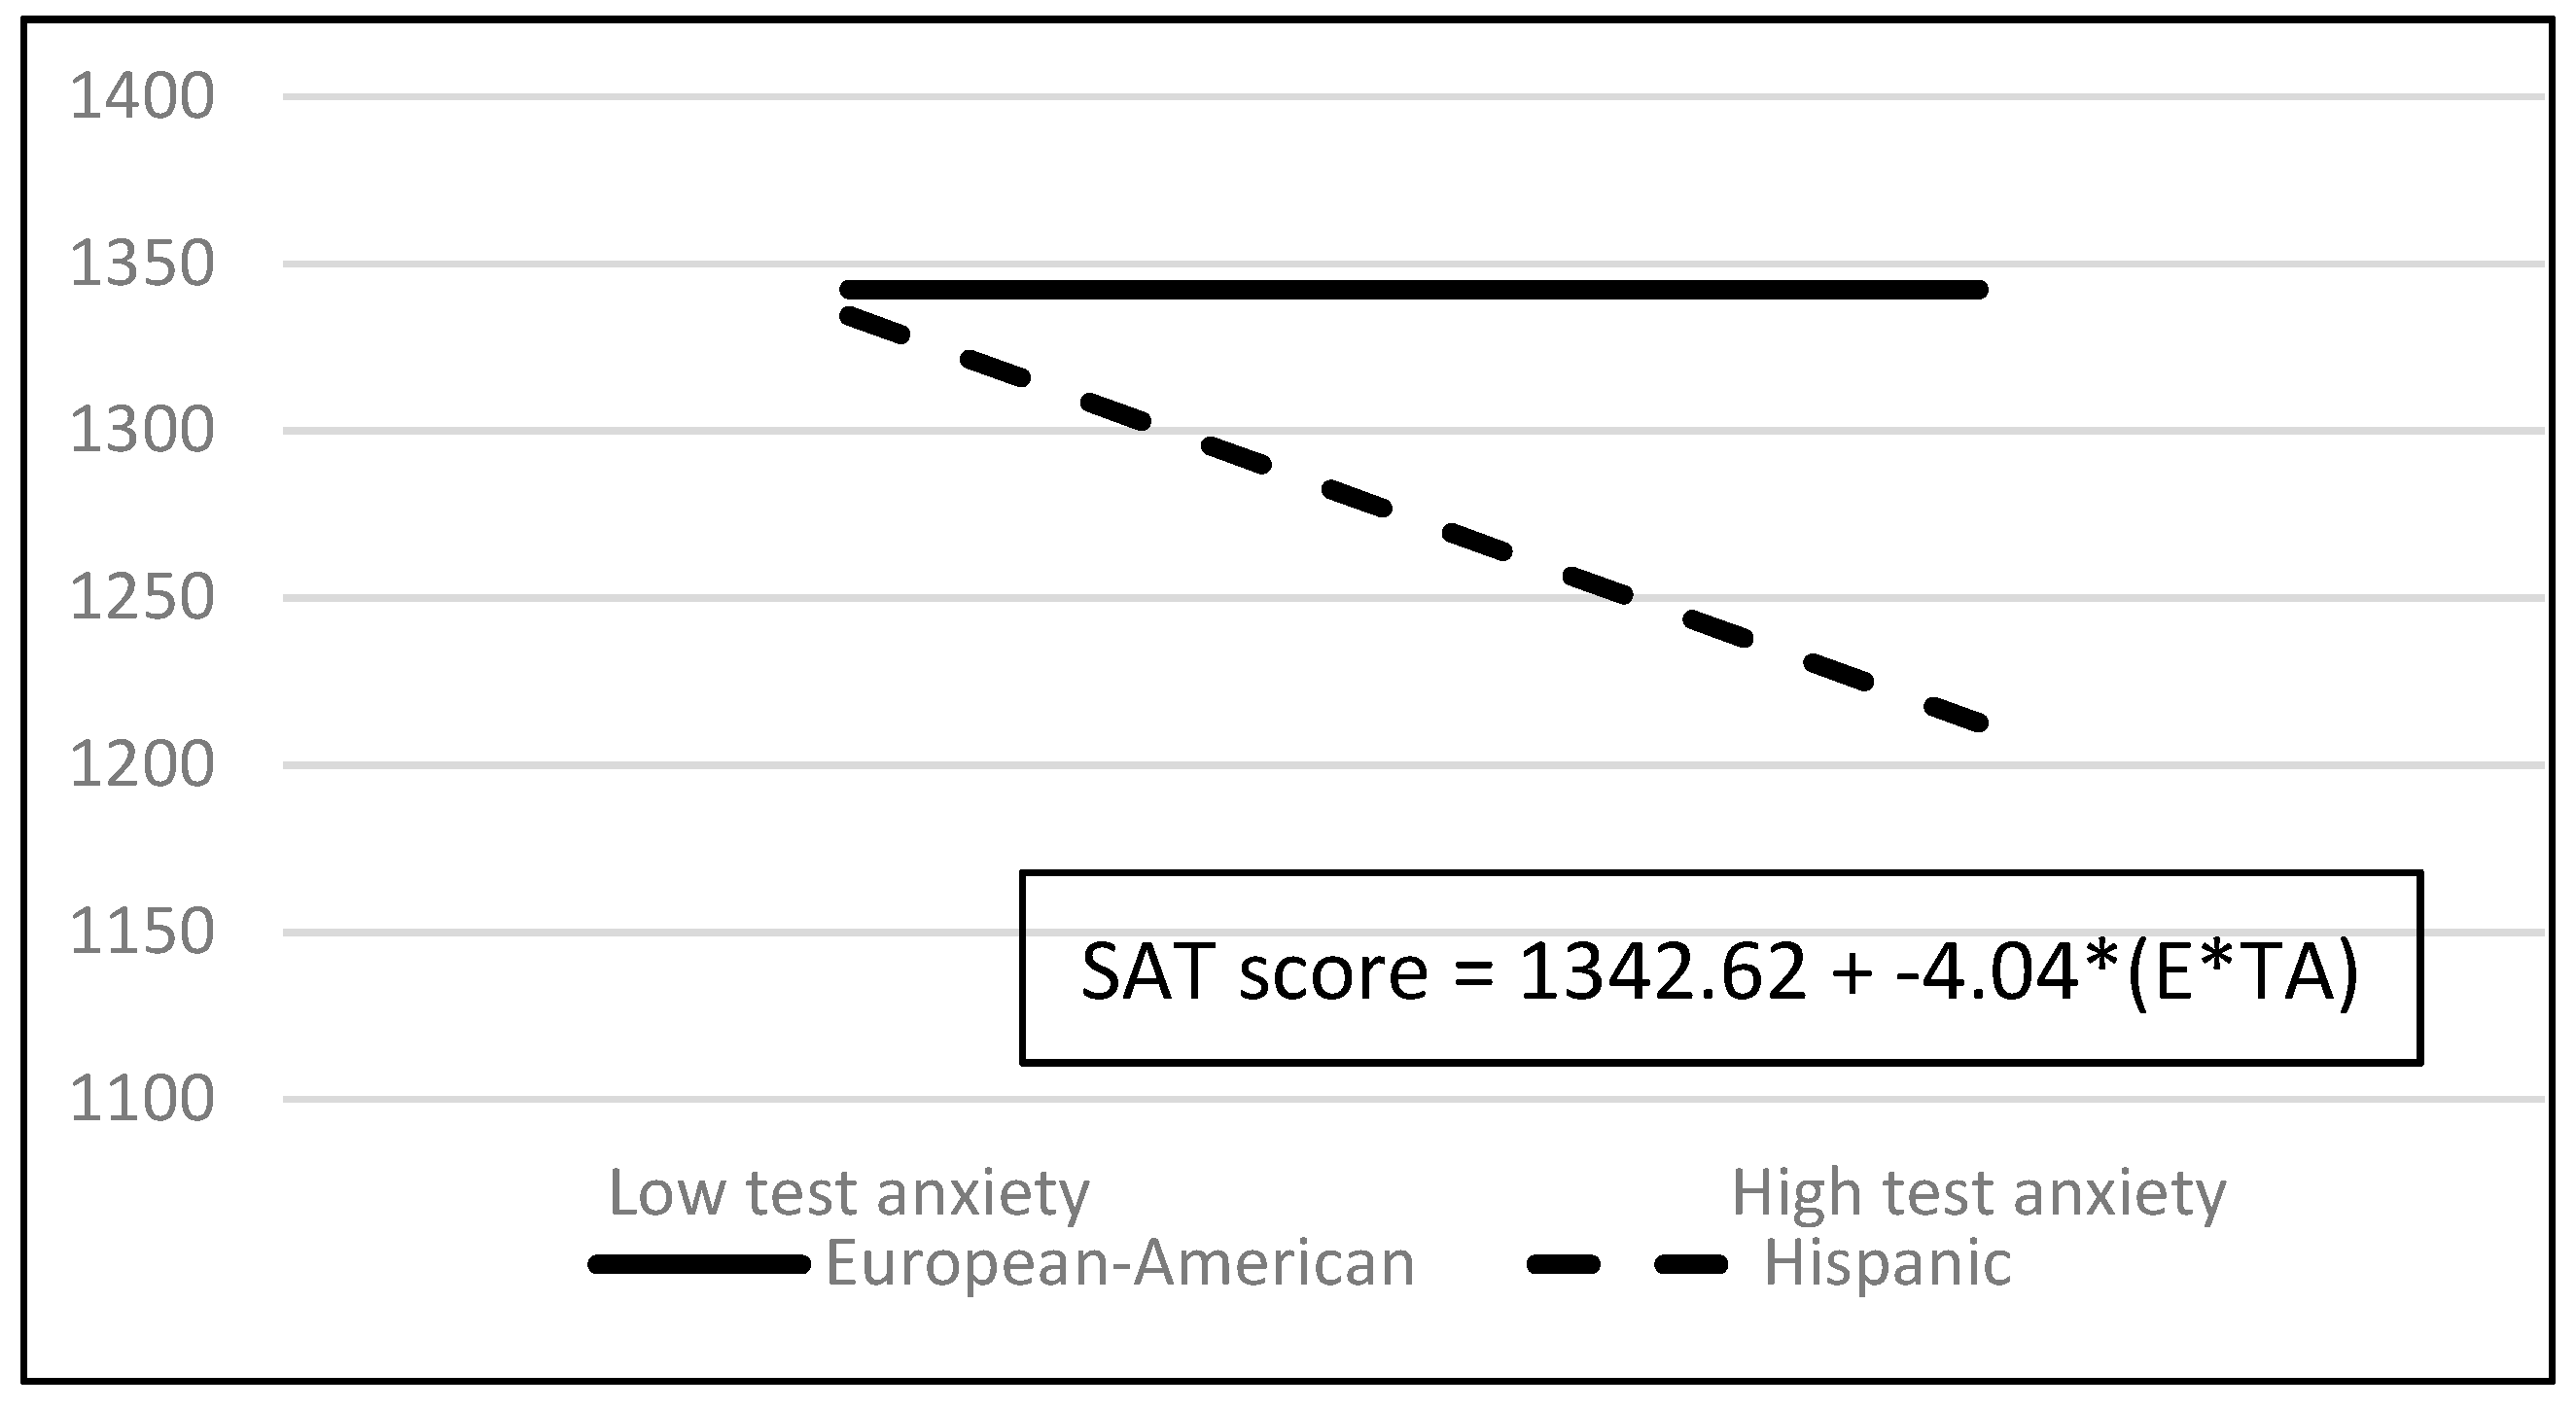 Solved Scholastic Assessment Test (SAT) scores, which have